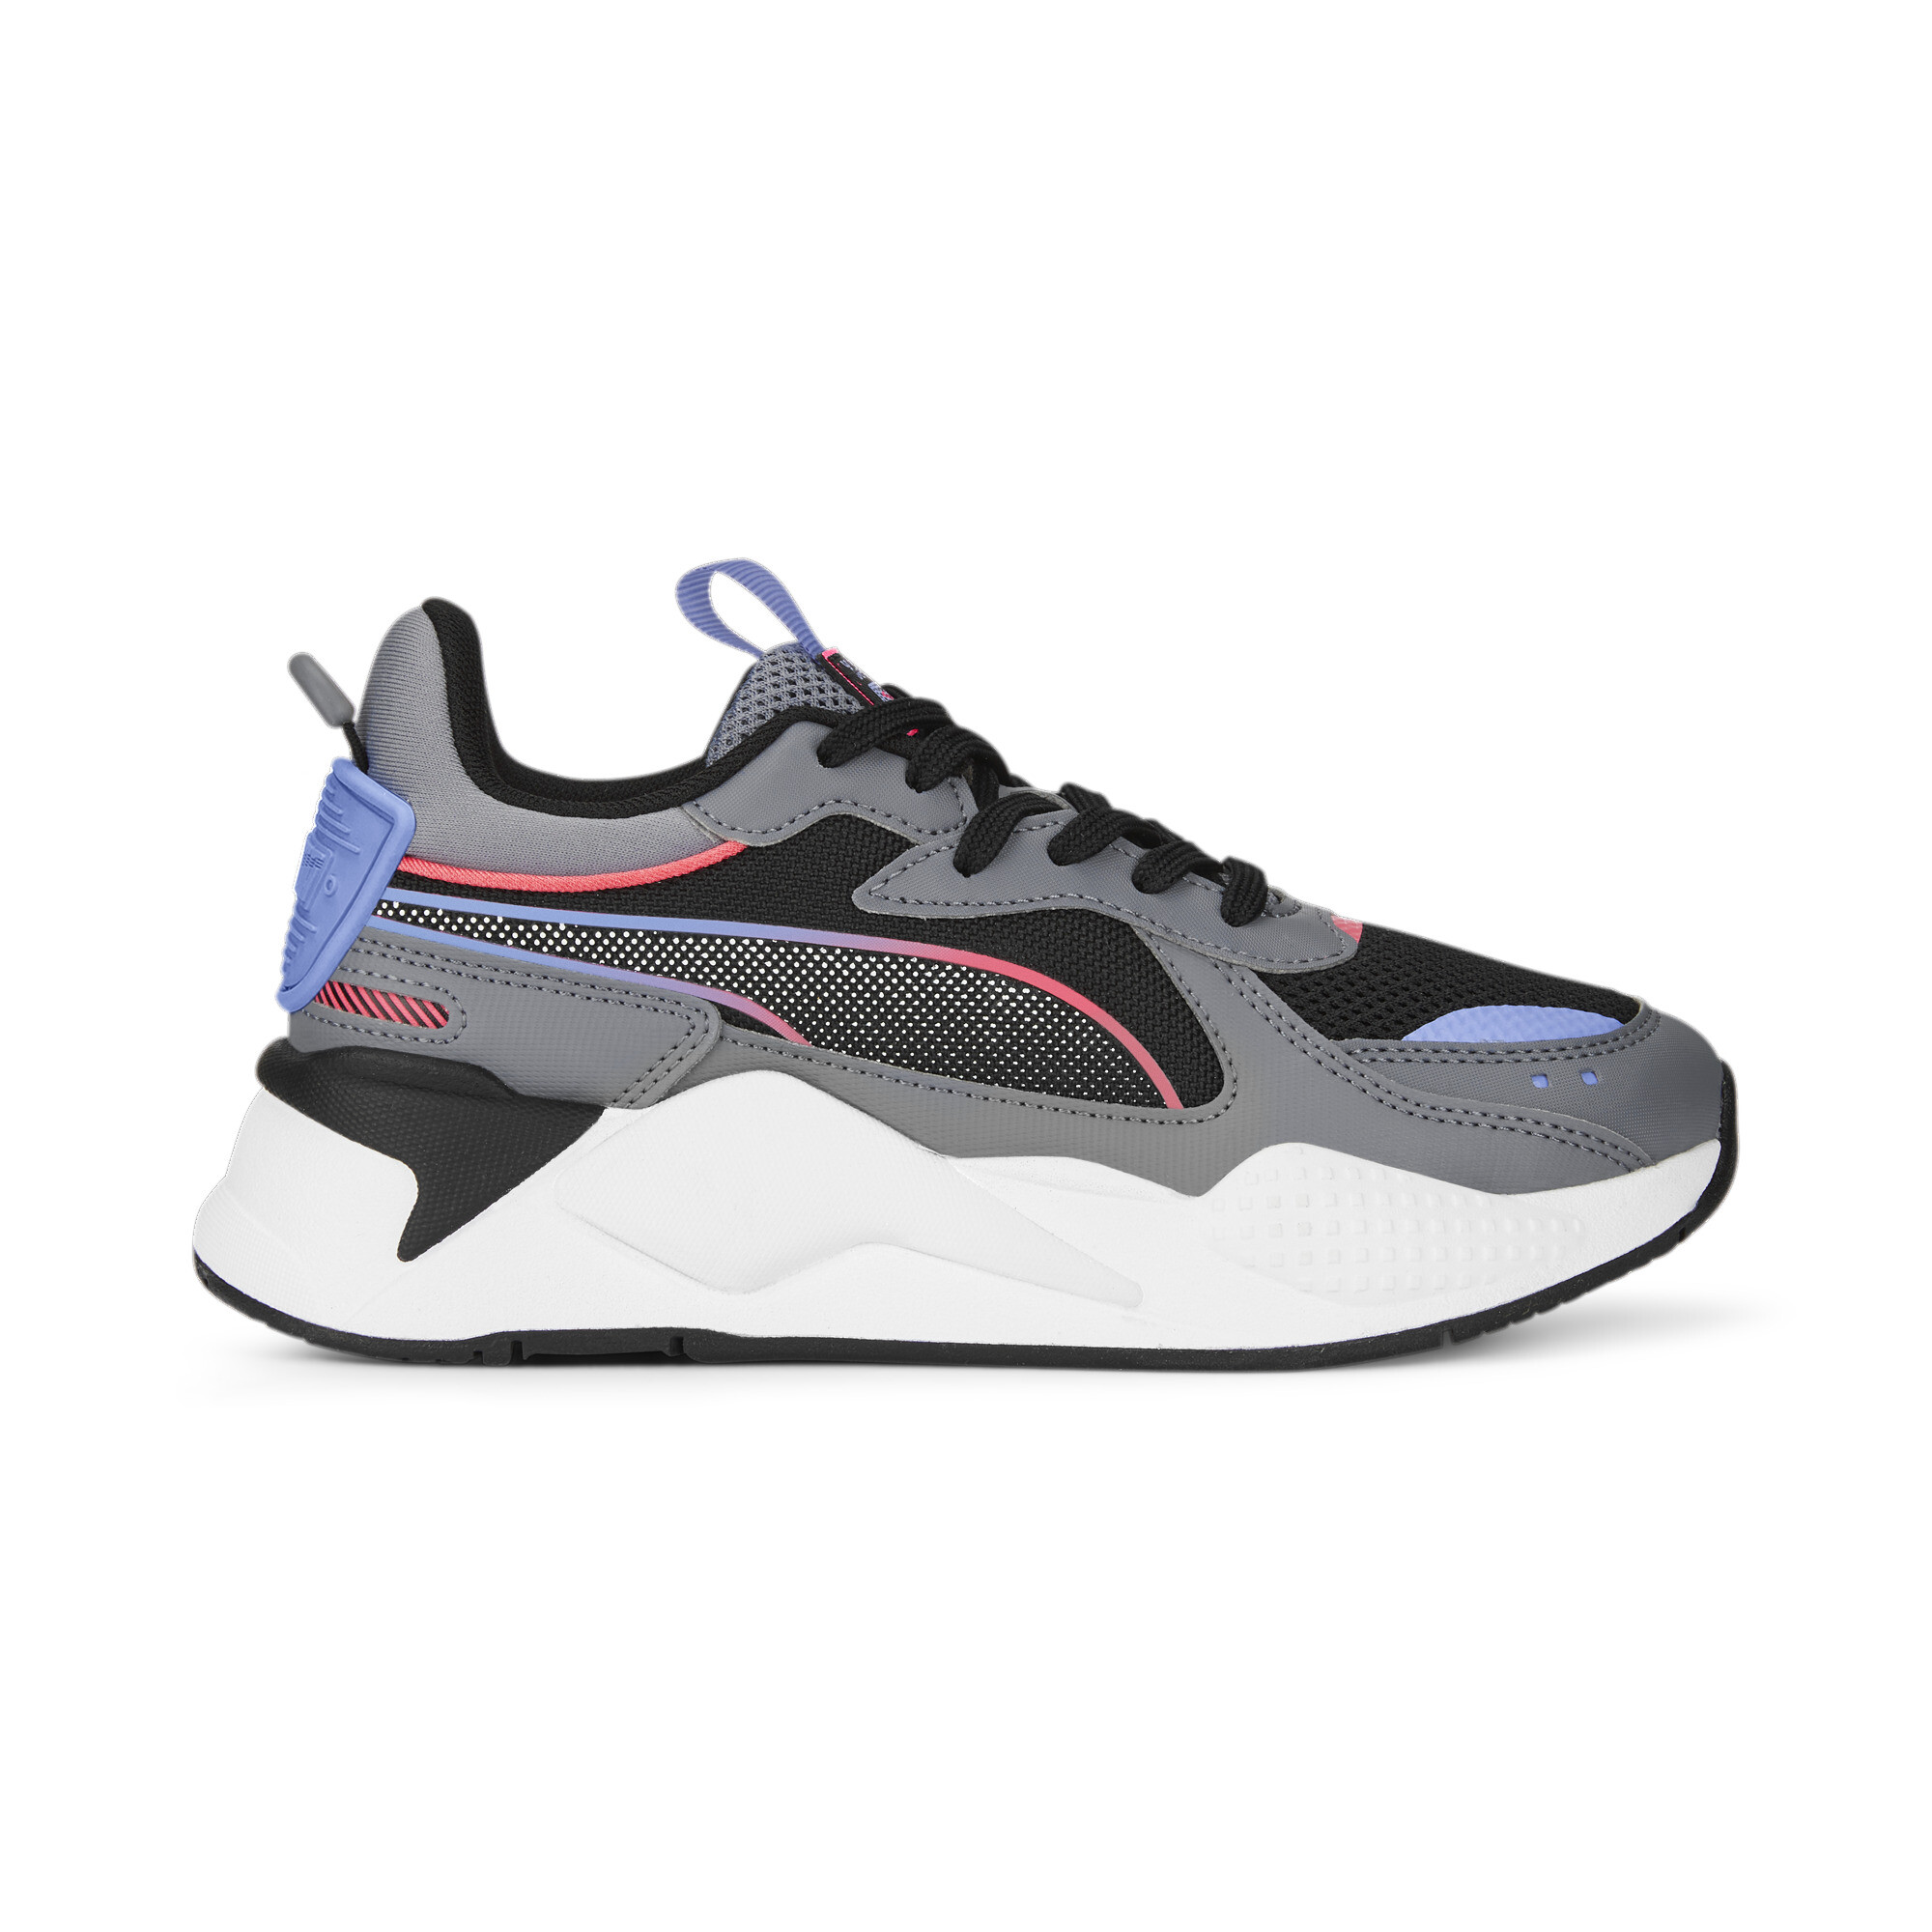 Puma RS-X 3D Sneakers Youth, Black, Size 35.5, Shoes